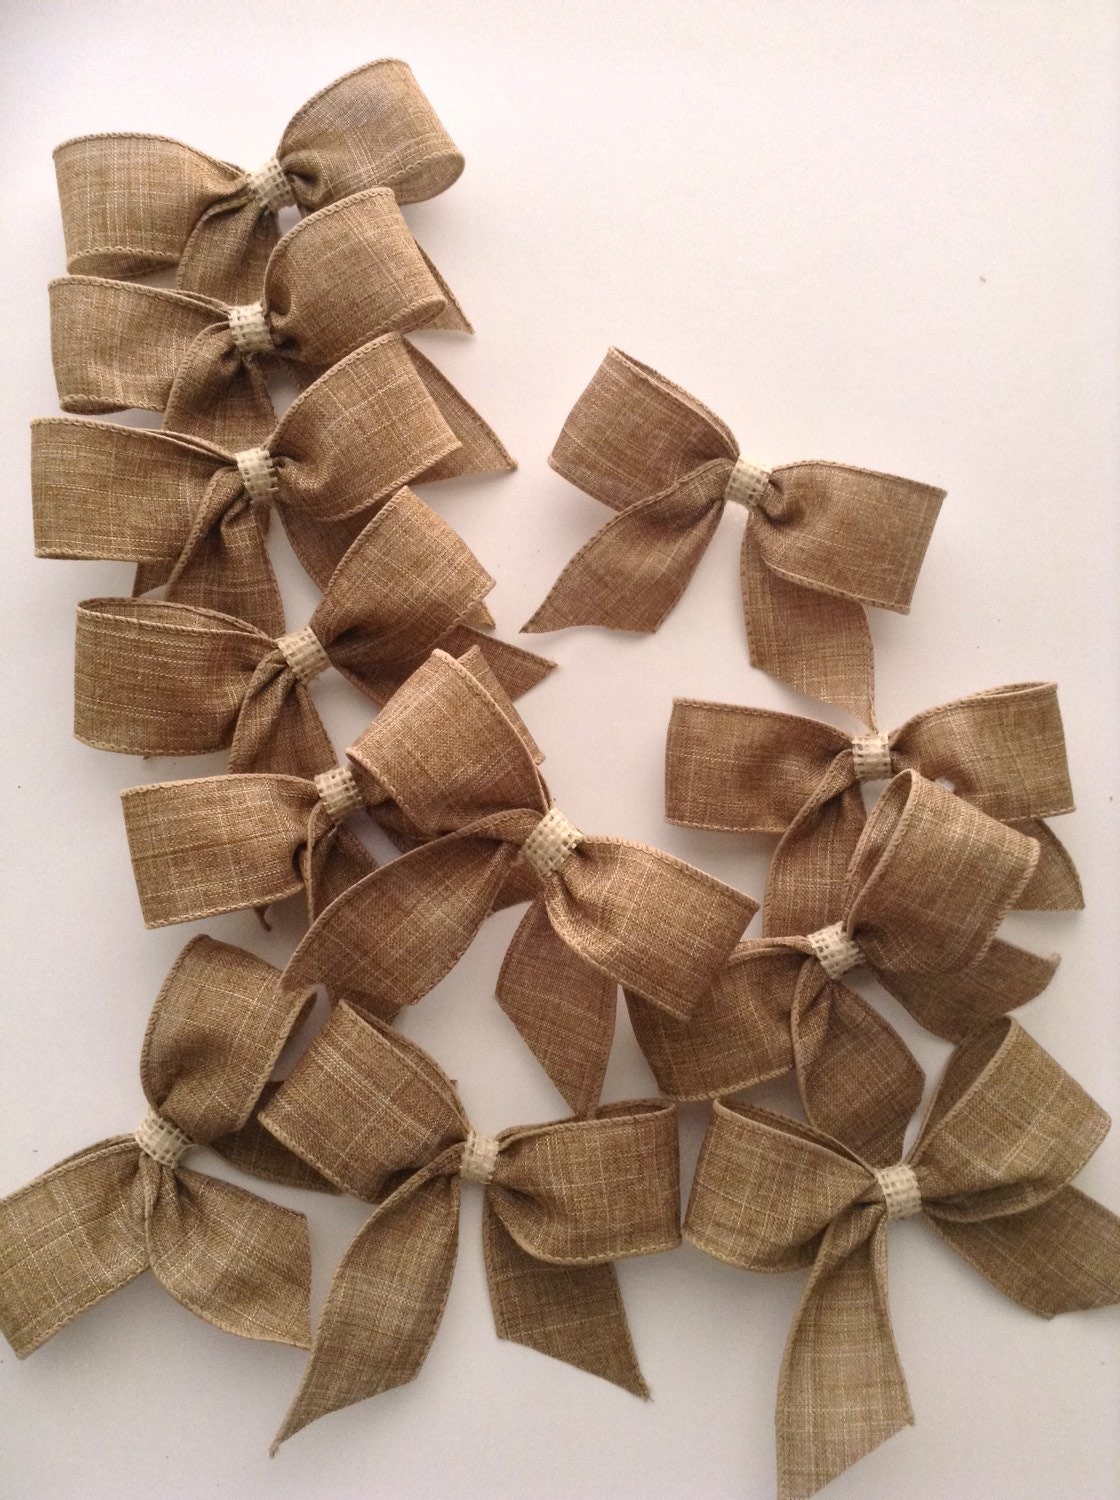 Natural White Chevron Burlap Wreath Bow - available in 2 sizes - Package  Perfect Bows